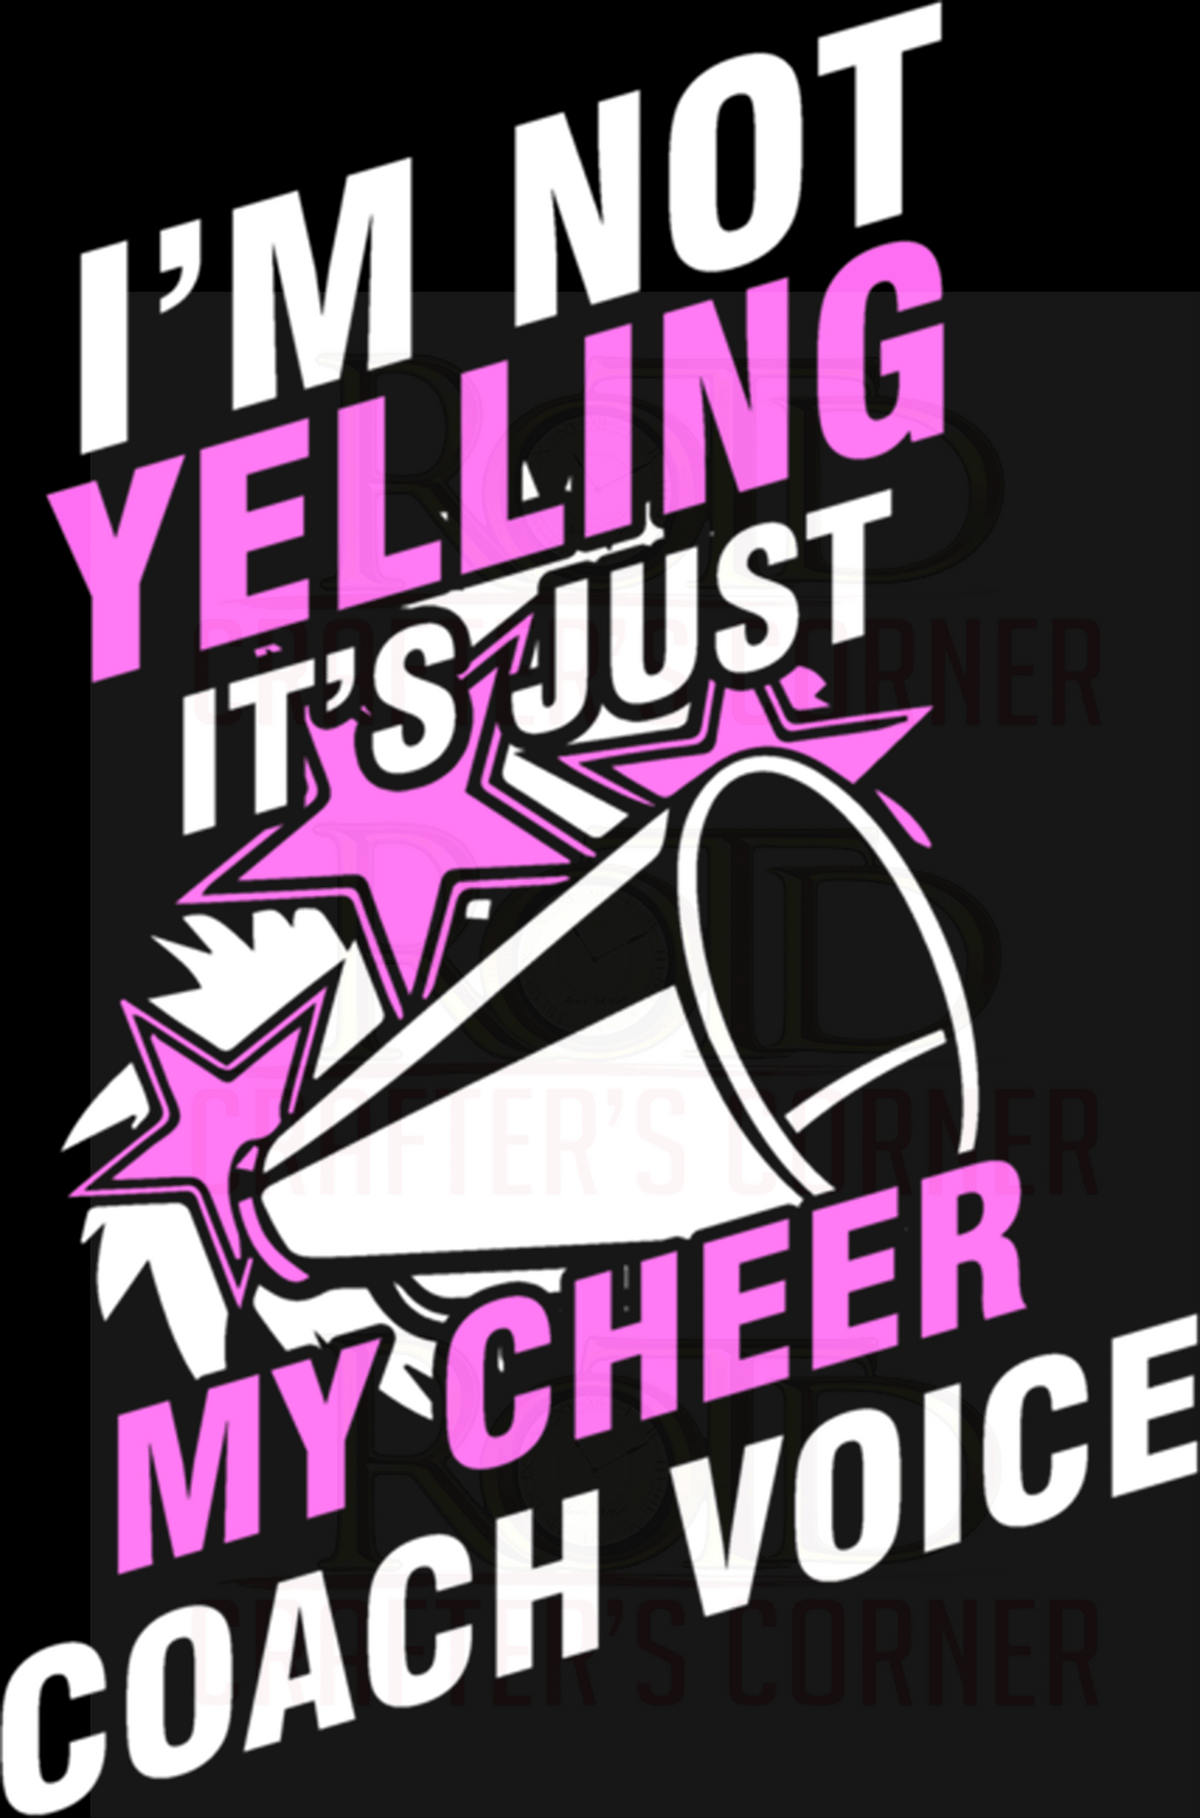 DTF Screen Print Image - Cheer Coach Voice (35)